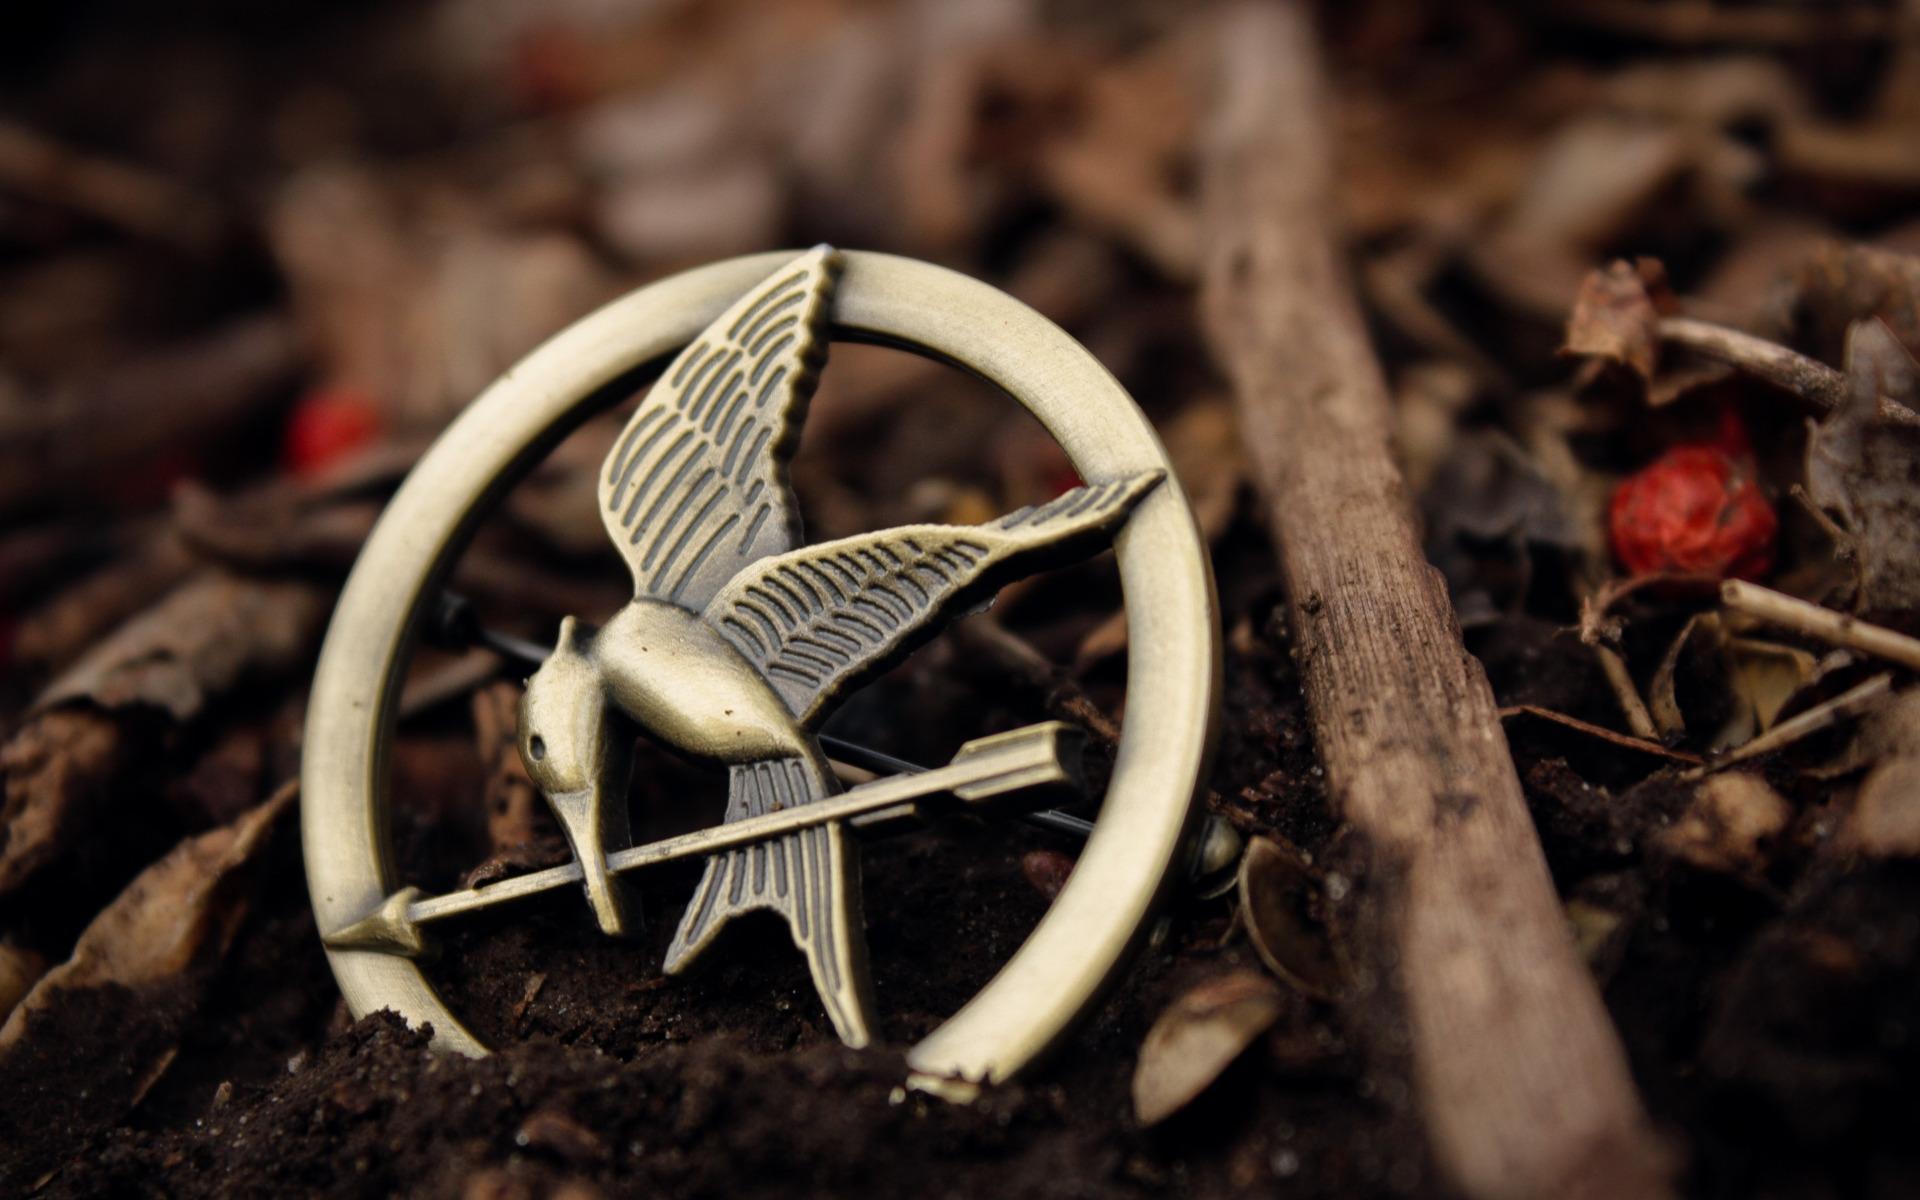 The hunger games wallpaper Gallery